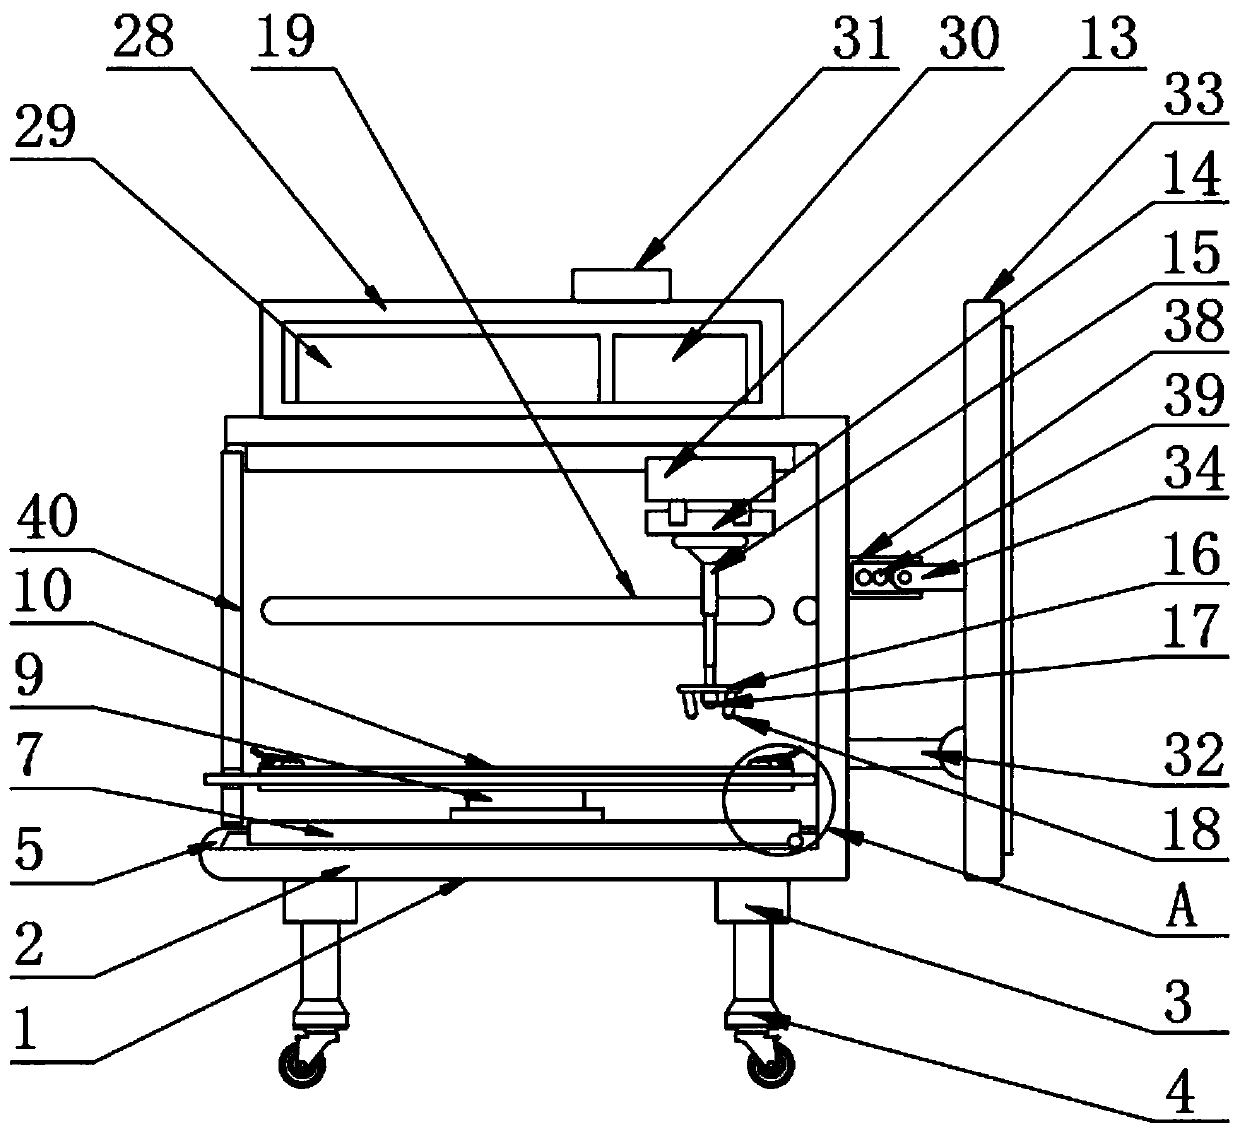 An image acquisition device for mechanical design